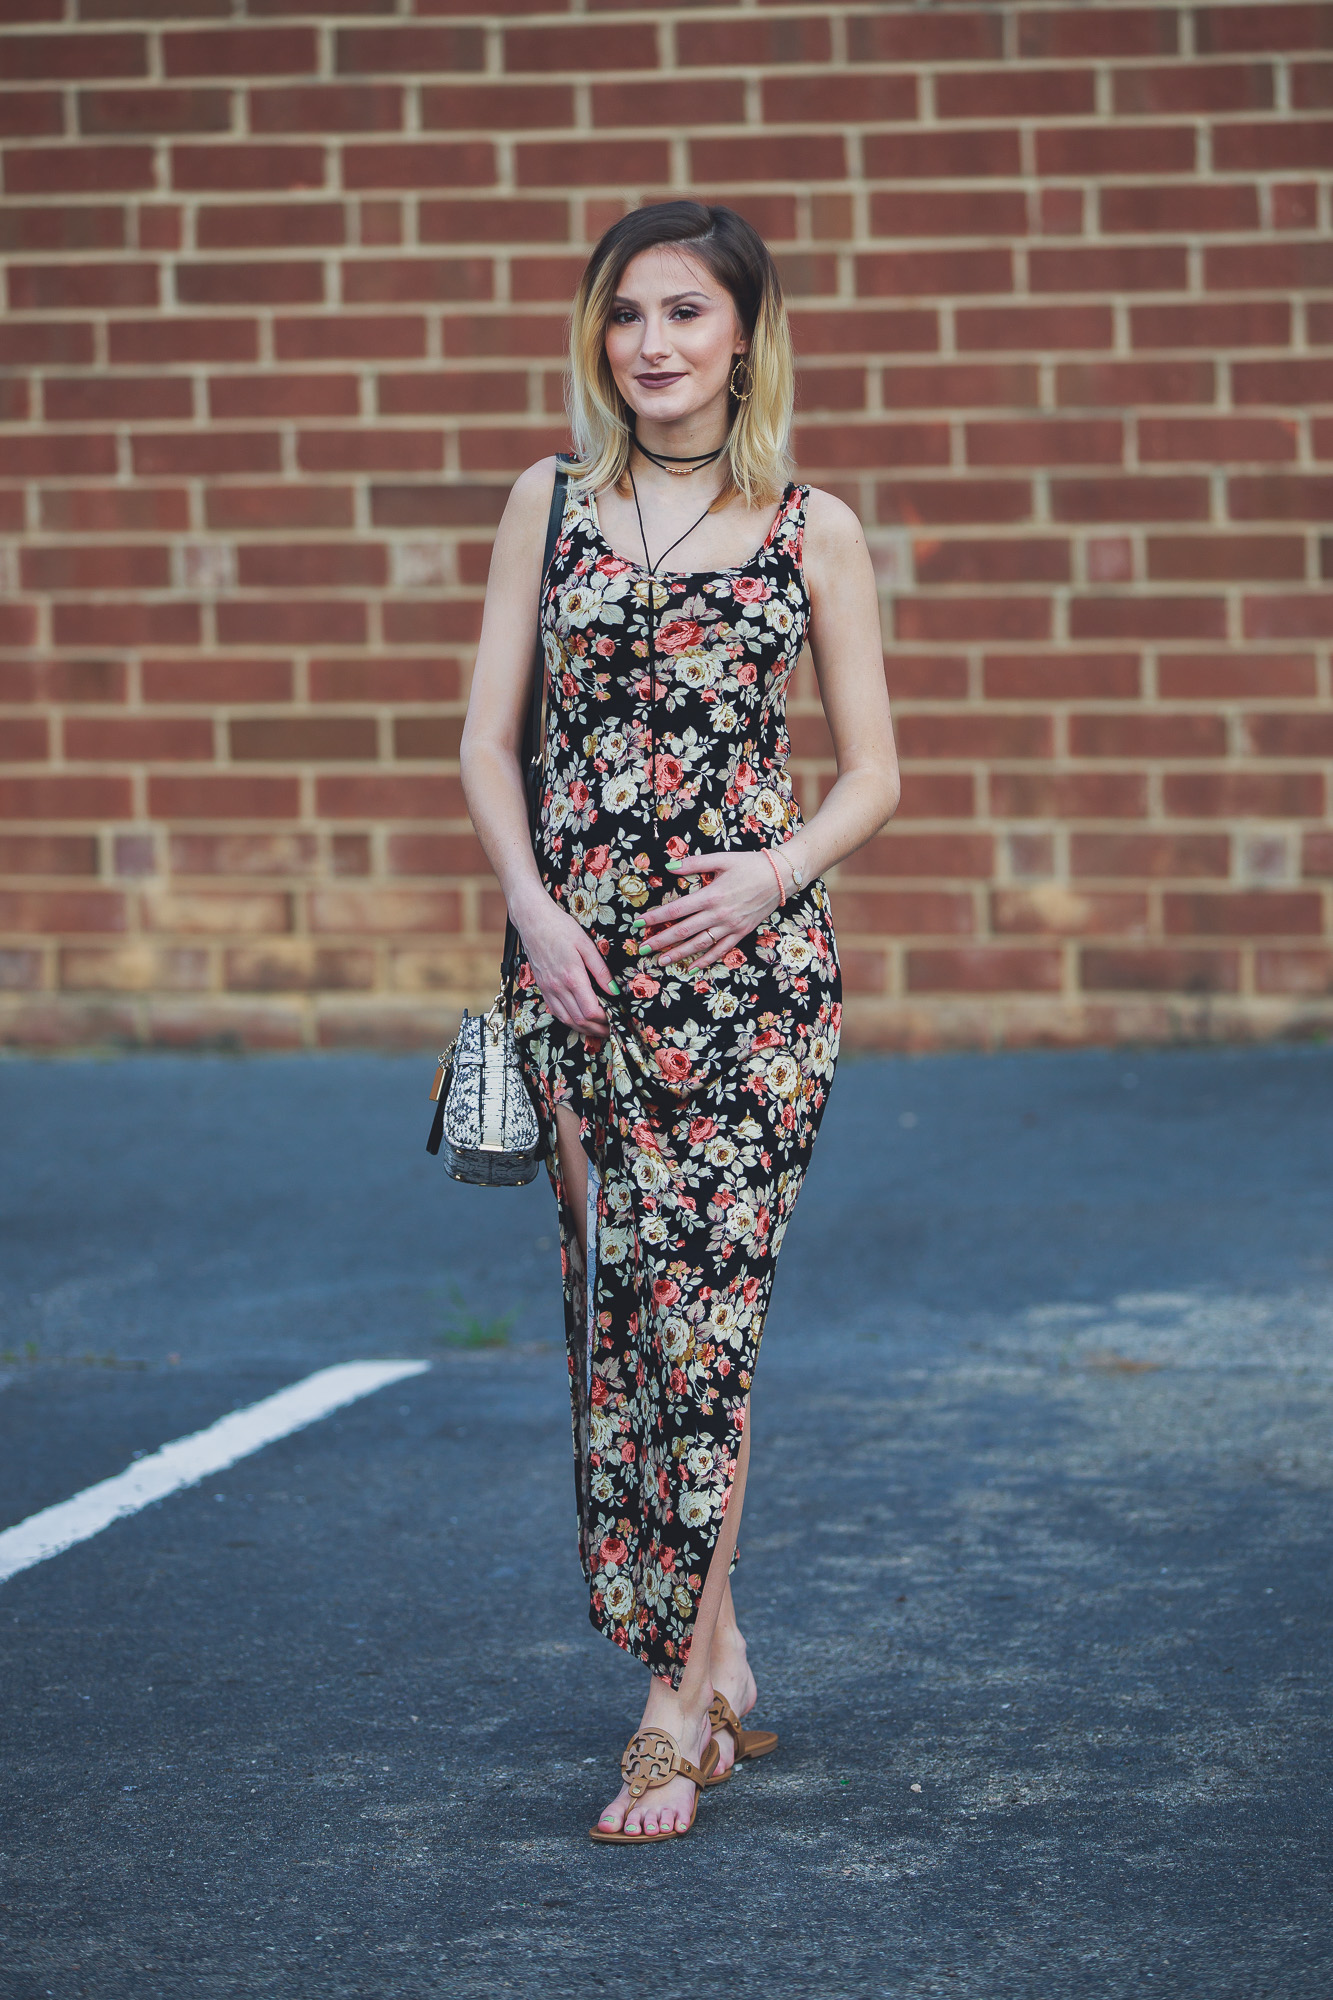 Lifestyle, fashion, and beauty blogger / vlogger Jessica Linn wearing a floral black maxi dress, Tory Burch sandals, a Coach purse, and earrings from CY Design Studio in Cary North Carolina on Linn Style